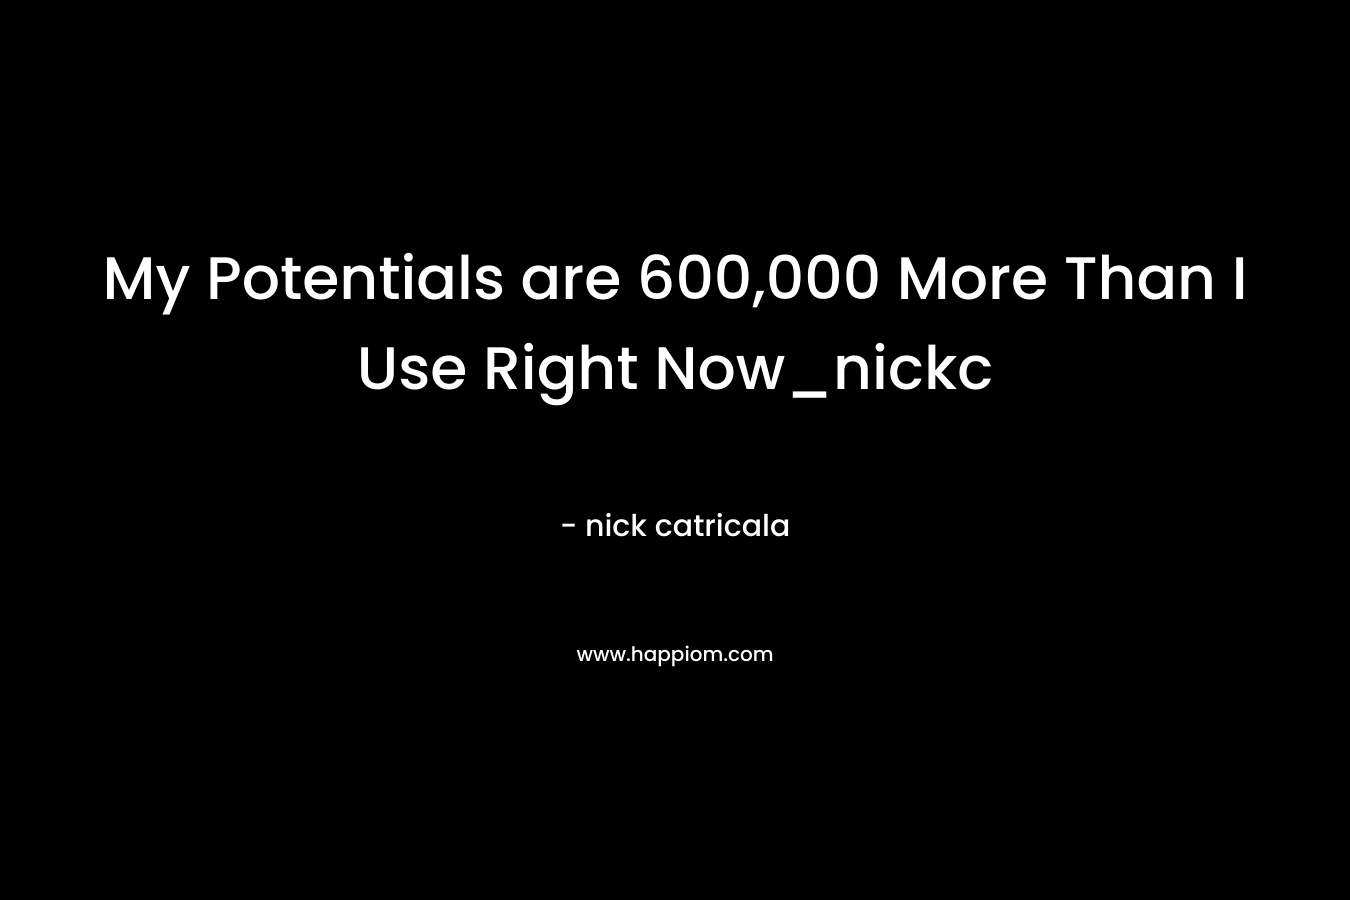 My Potentials are 600,000 More Than I Use Right Now_nickc – nick catricala